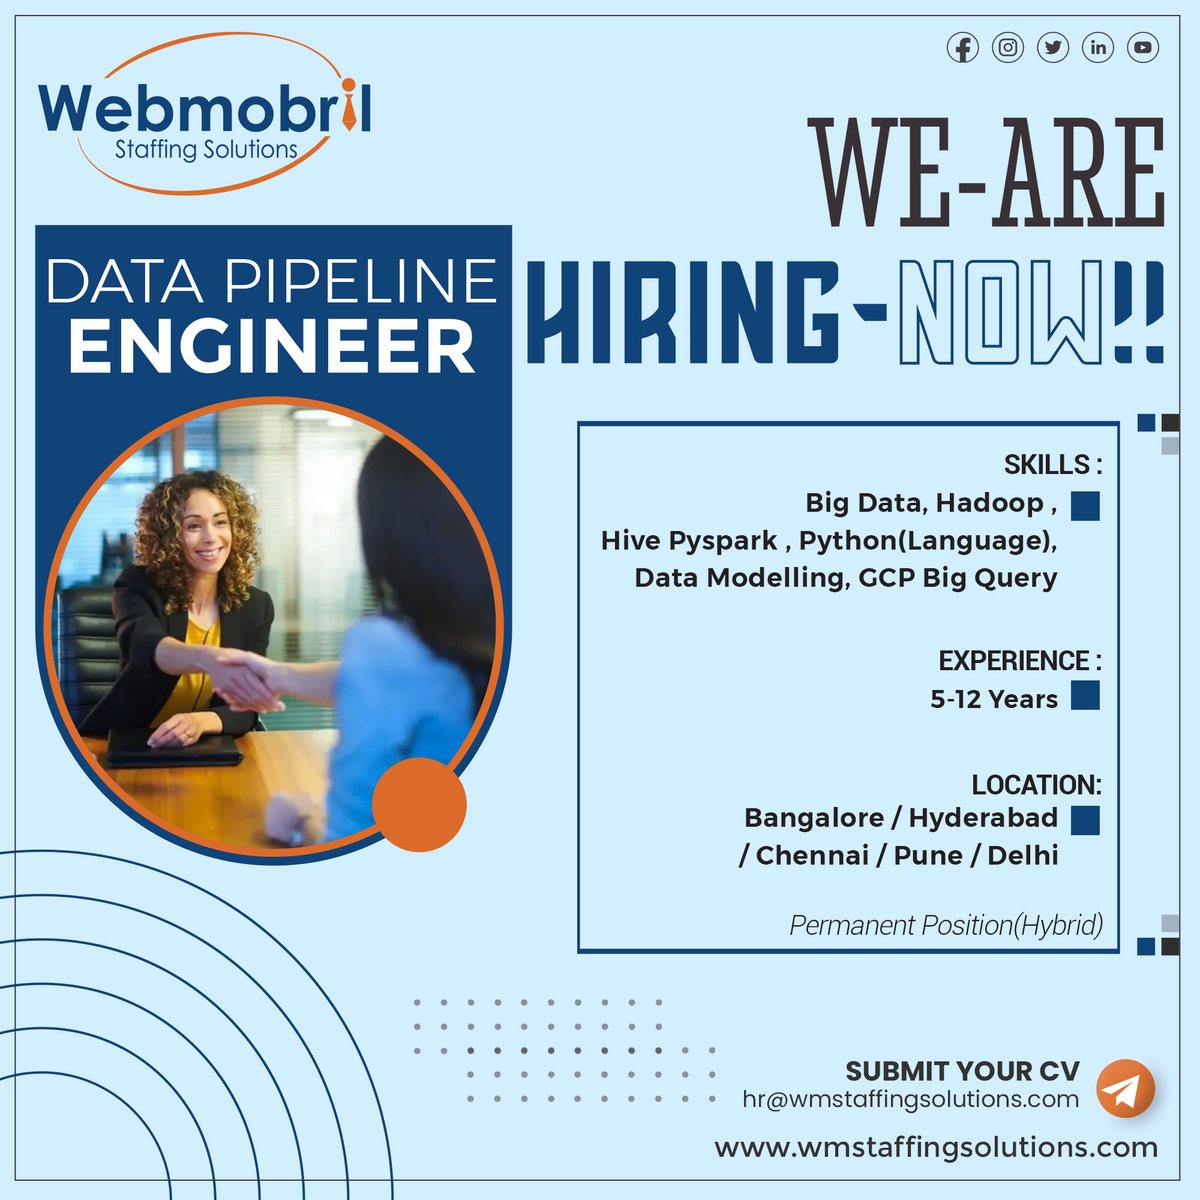 'Join Our Team as a Data Pipeline Engineer: Empower Big Data with Your Expertise!'
.
.
#DataPipelineEngineer #JobOpening #Hiring #BigData #Hadoop #Hive #Pyspark #Python #DataModelling #GCPBigQuery #BangaloreJobs #HyderabadJobs #ChennaiJobs #PuneJobs #DelhiJobs #webmobrilstaffing